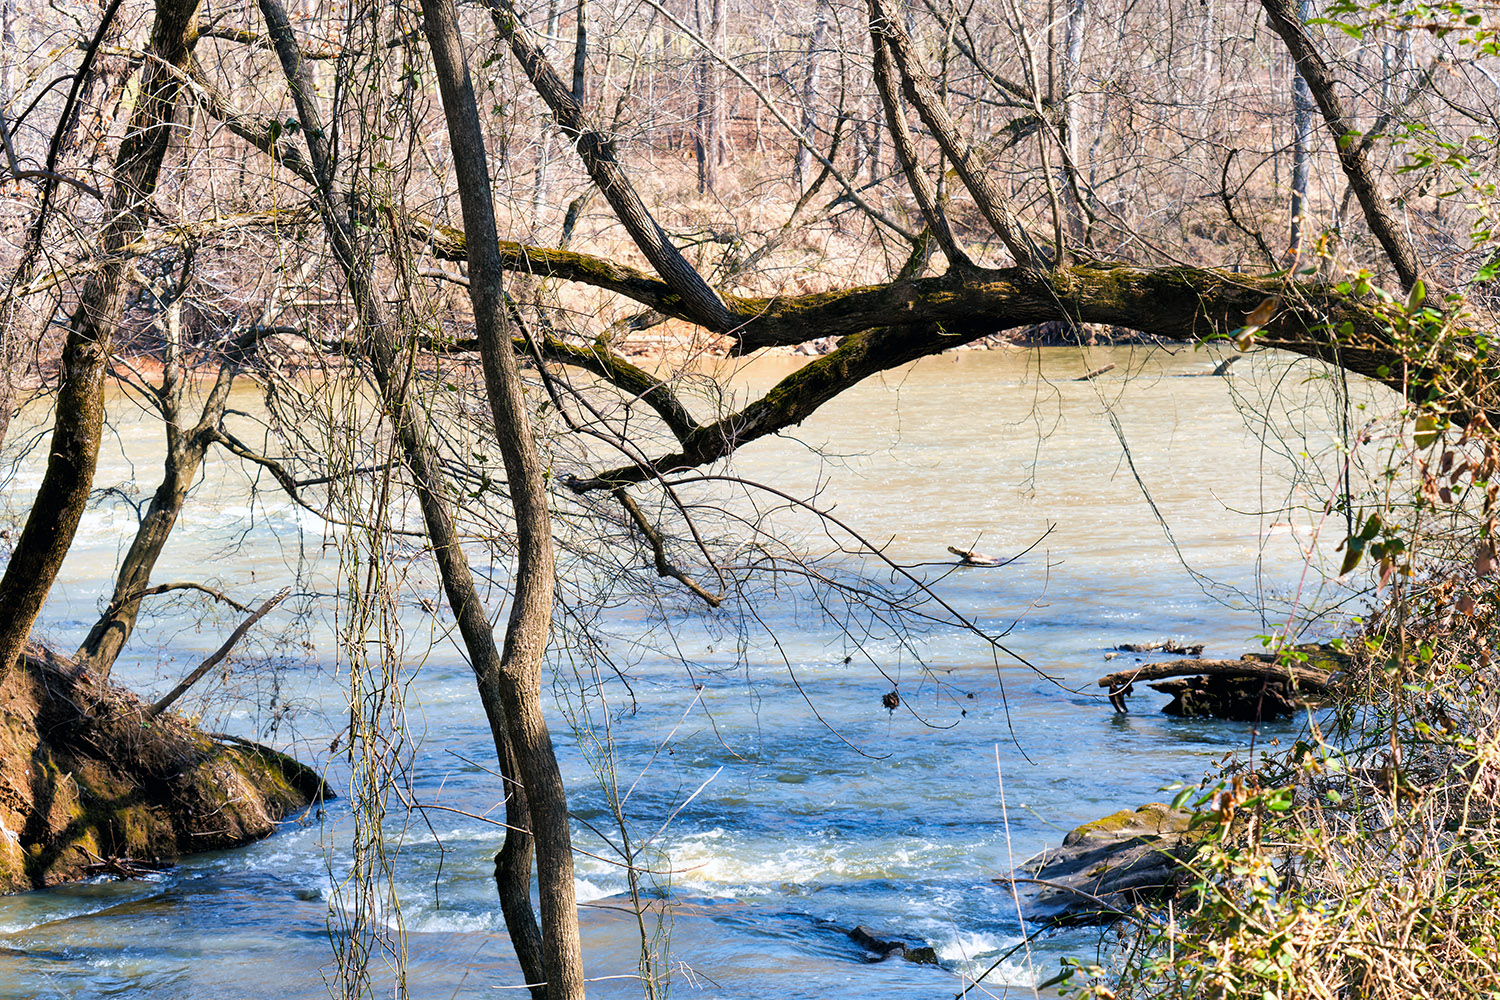 Looking at the Haw River before crossing over to the southern shore of the park